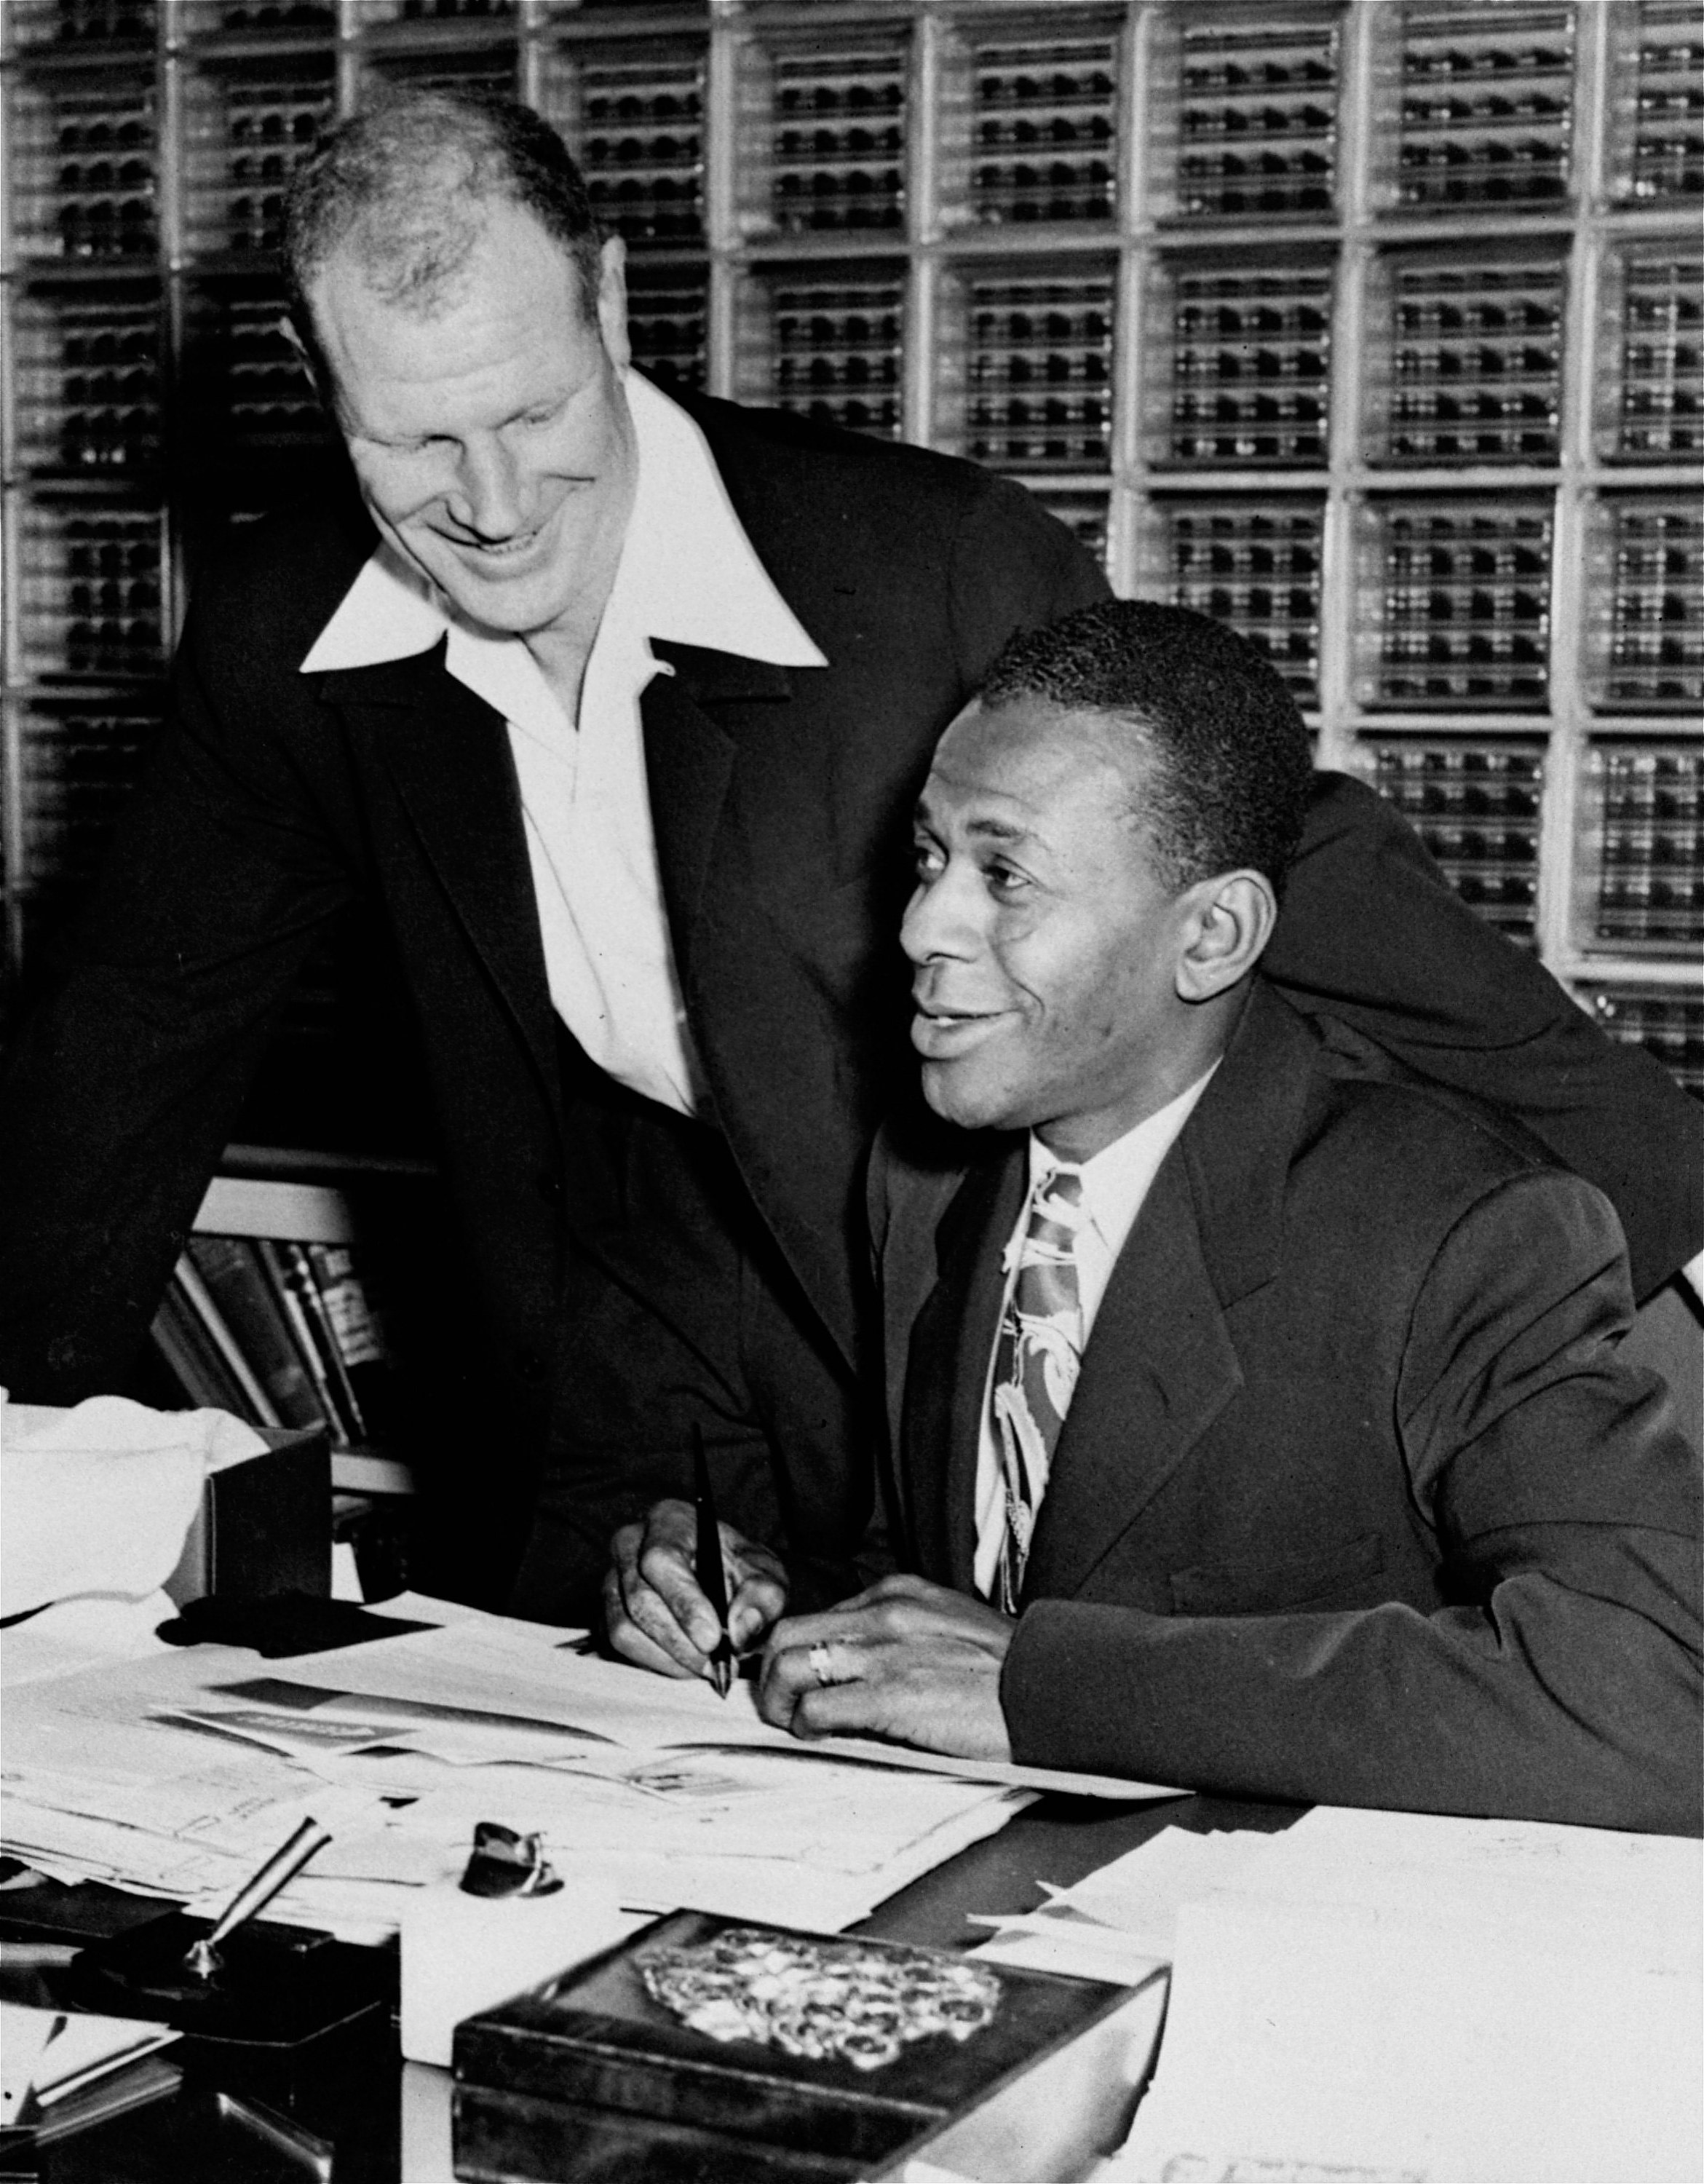 Satchel Paige signs his 1953 contract with the St. Louis Browns as owner Bill Veeck looks on on Jan. 10, 1953. The right-handed hurler reportedly received between $25,000 and $30,000. It was the third Brownie contract for Paige, who first came to the Browns in 1951 after Veeck had taken over the club.